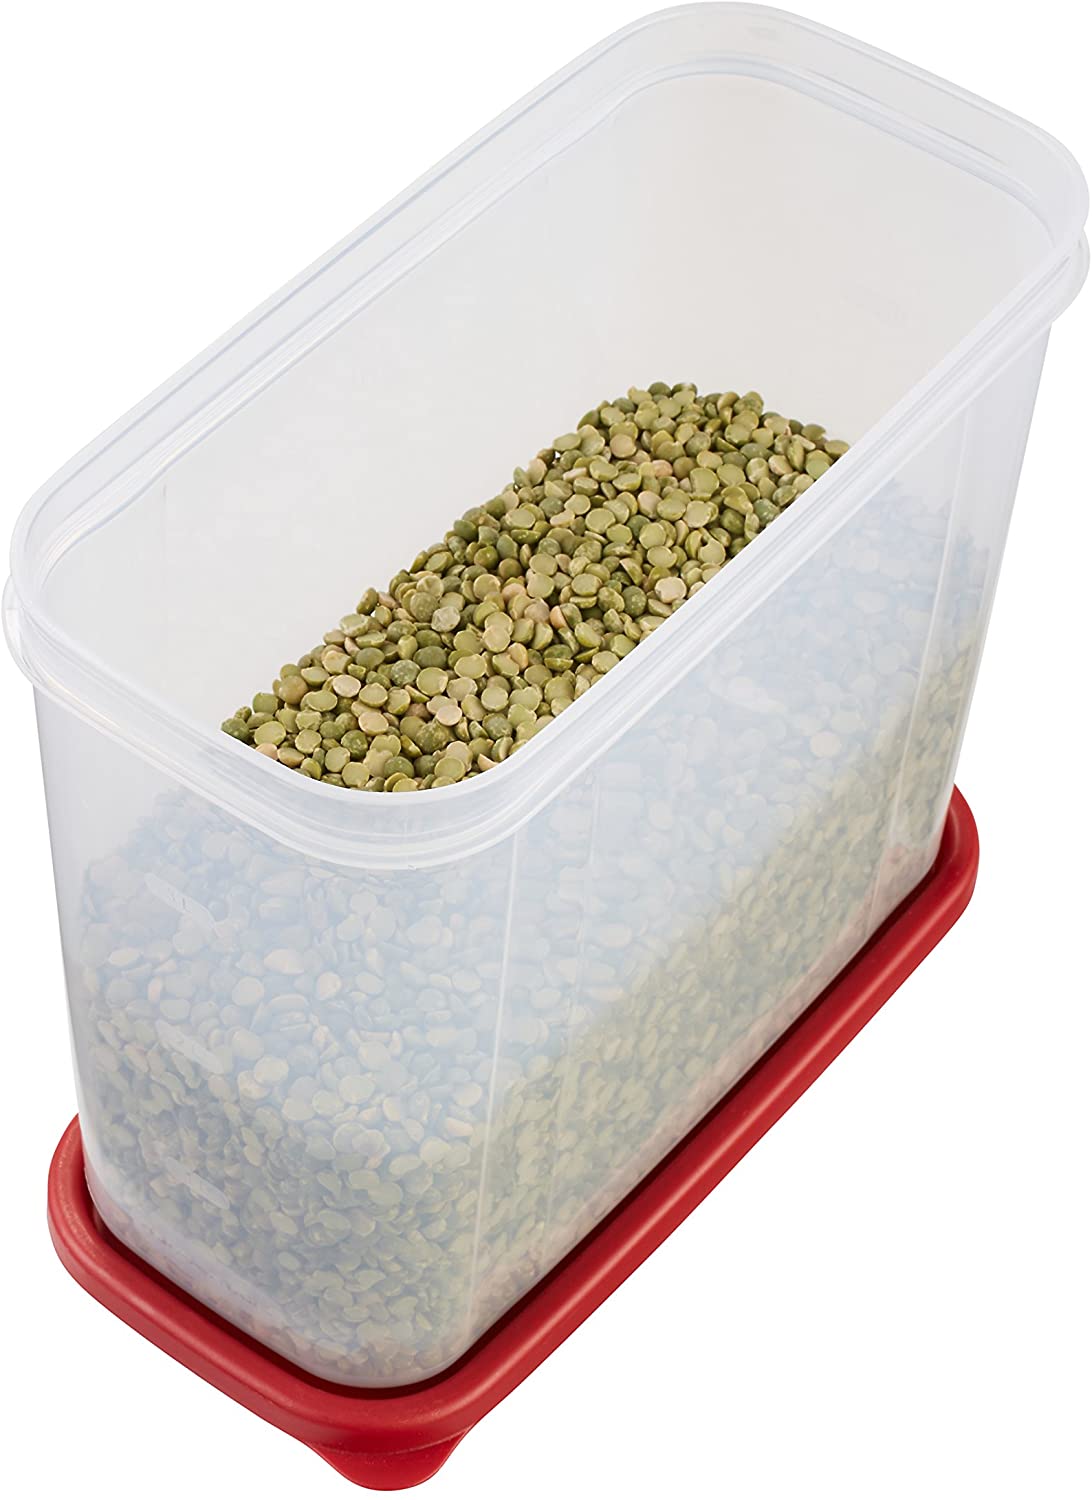 Rubbermaid Dry Food Container, Flour, 3.8 L - Whole and All